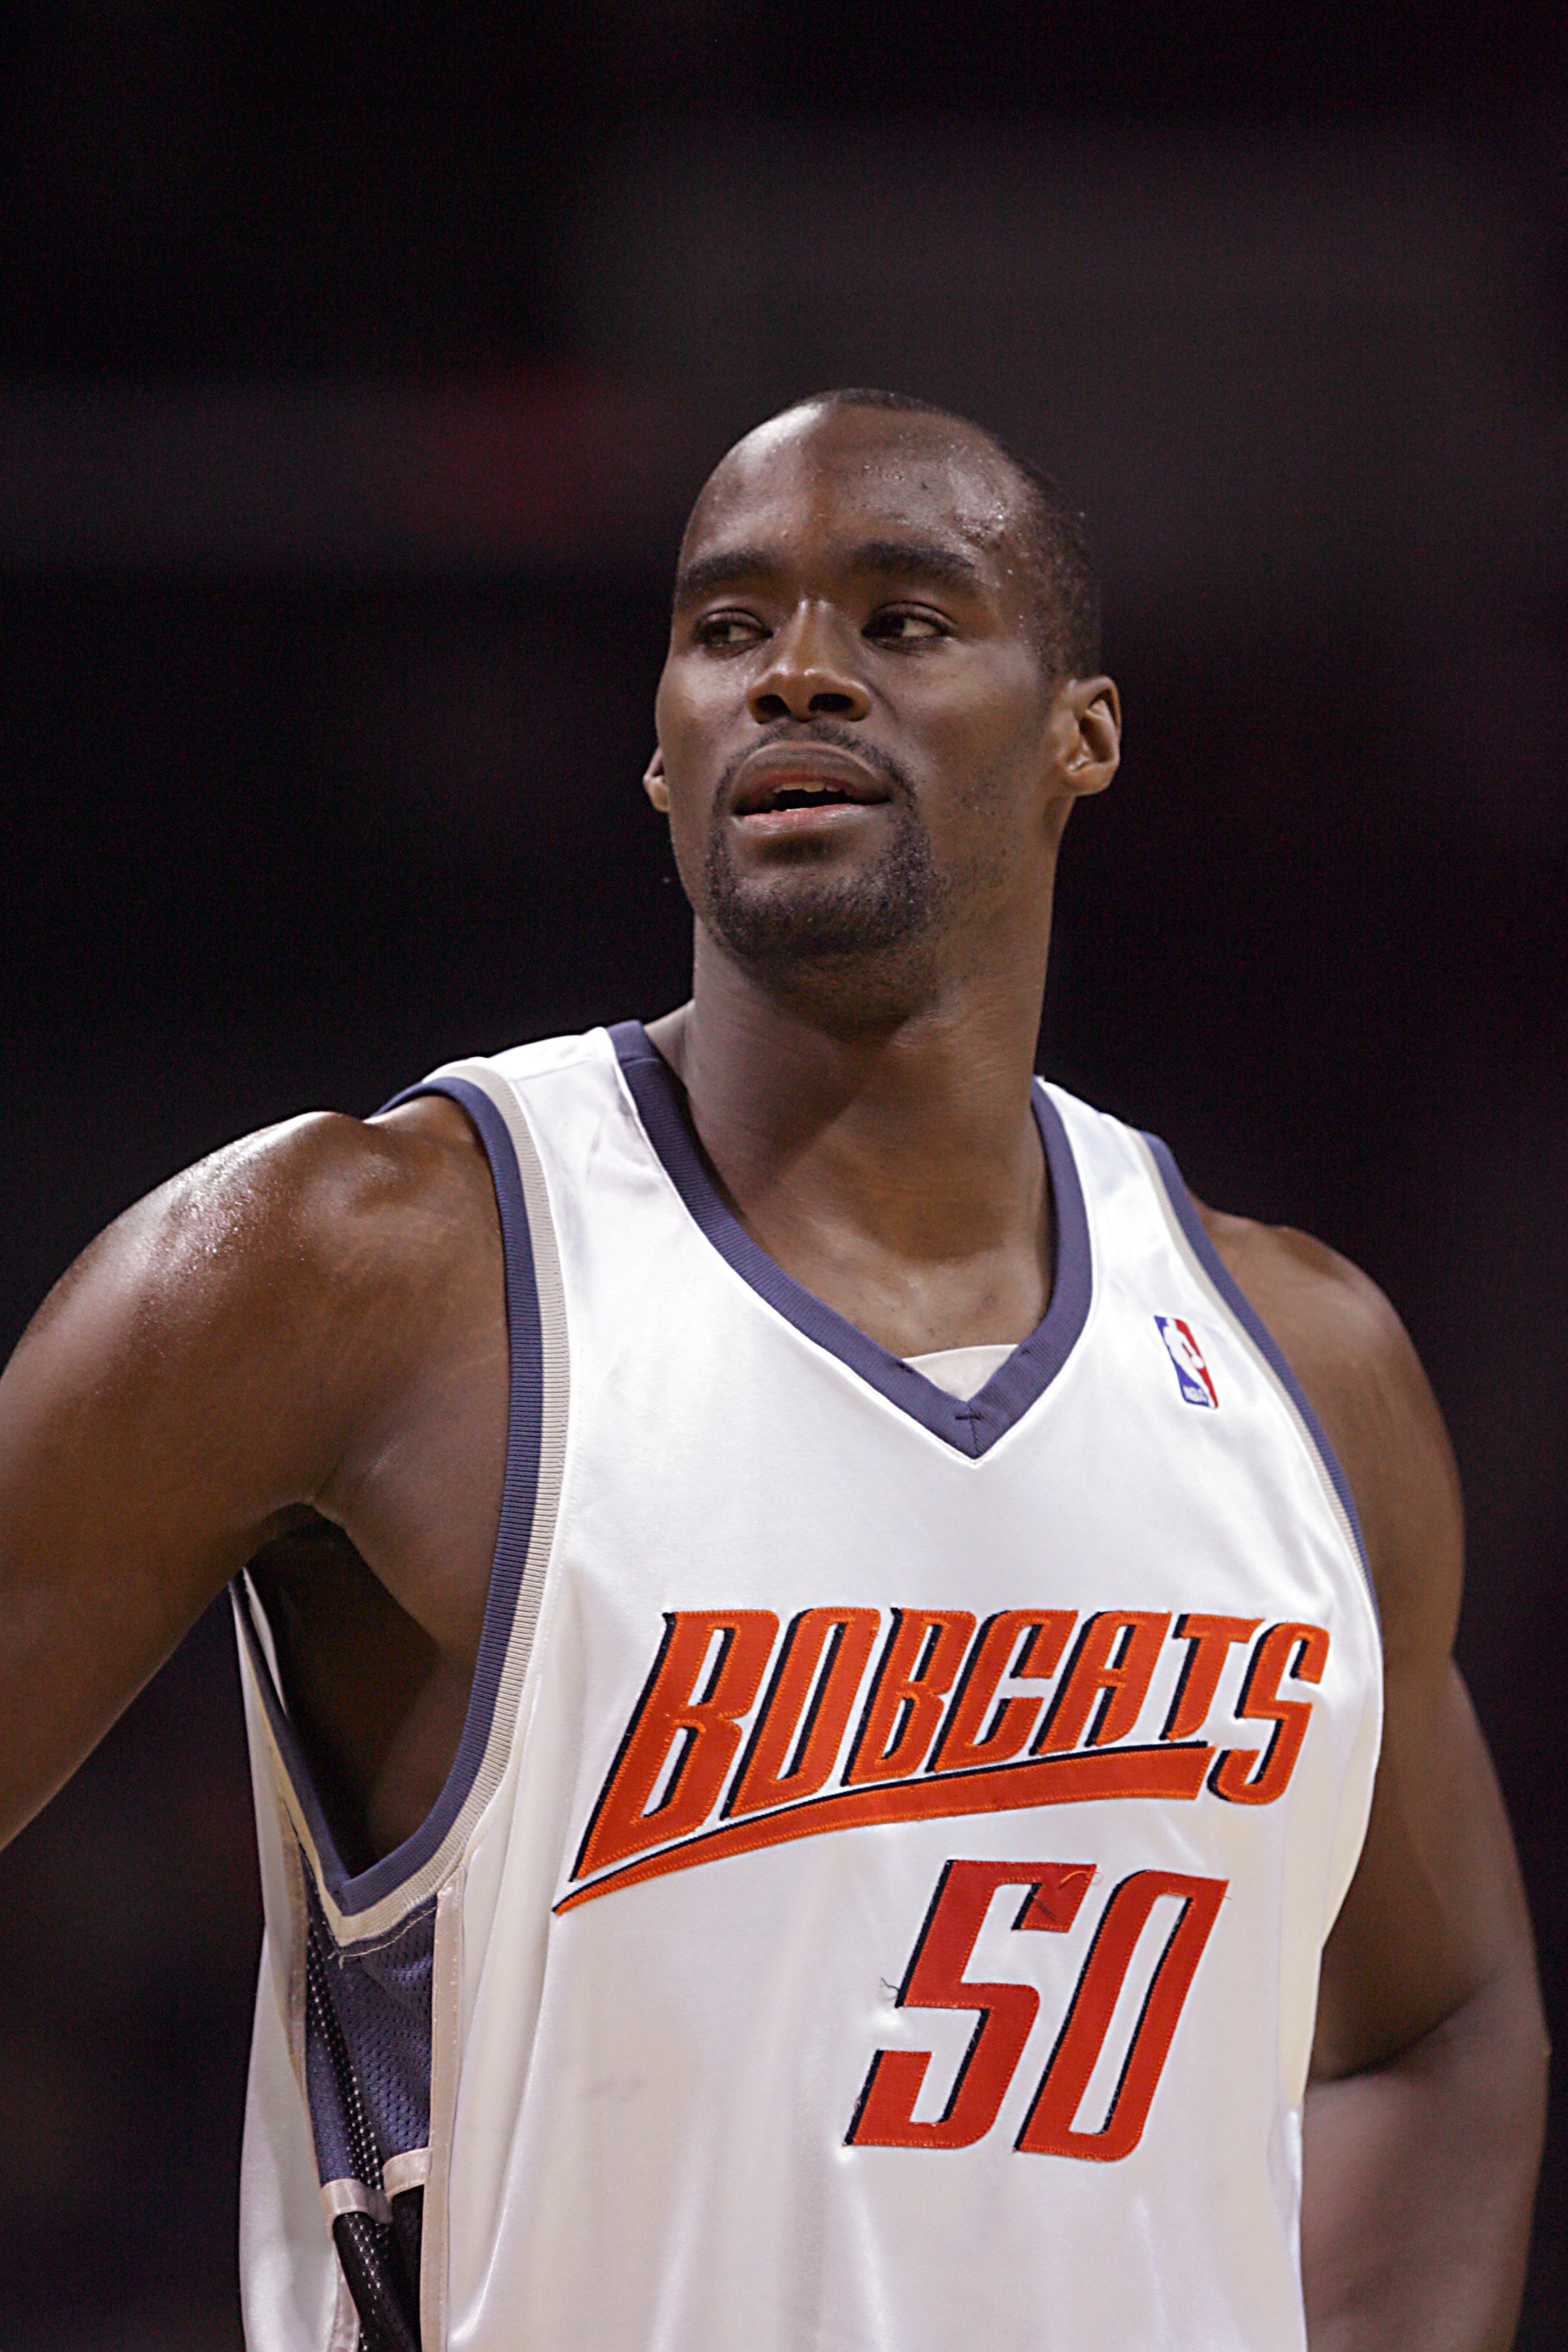 CHARLOTTE, NC - DECEMBER 21:  Emeka Okafor #50 of the Charlotte Bobcats looks on during the NBA game against the New York Knicks at Charlotte Bobcats Arena on December 21, 2007 in Charlotte, North Carolina.  The Bobcats won 105-95.  NOTE TO USER: User exp